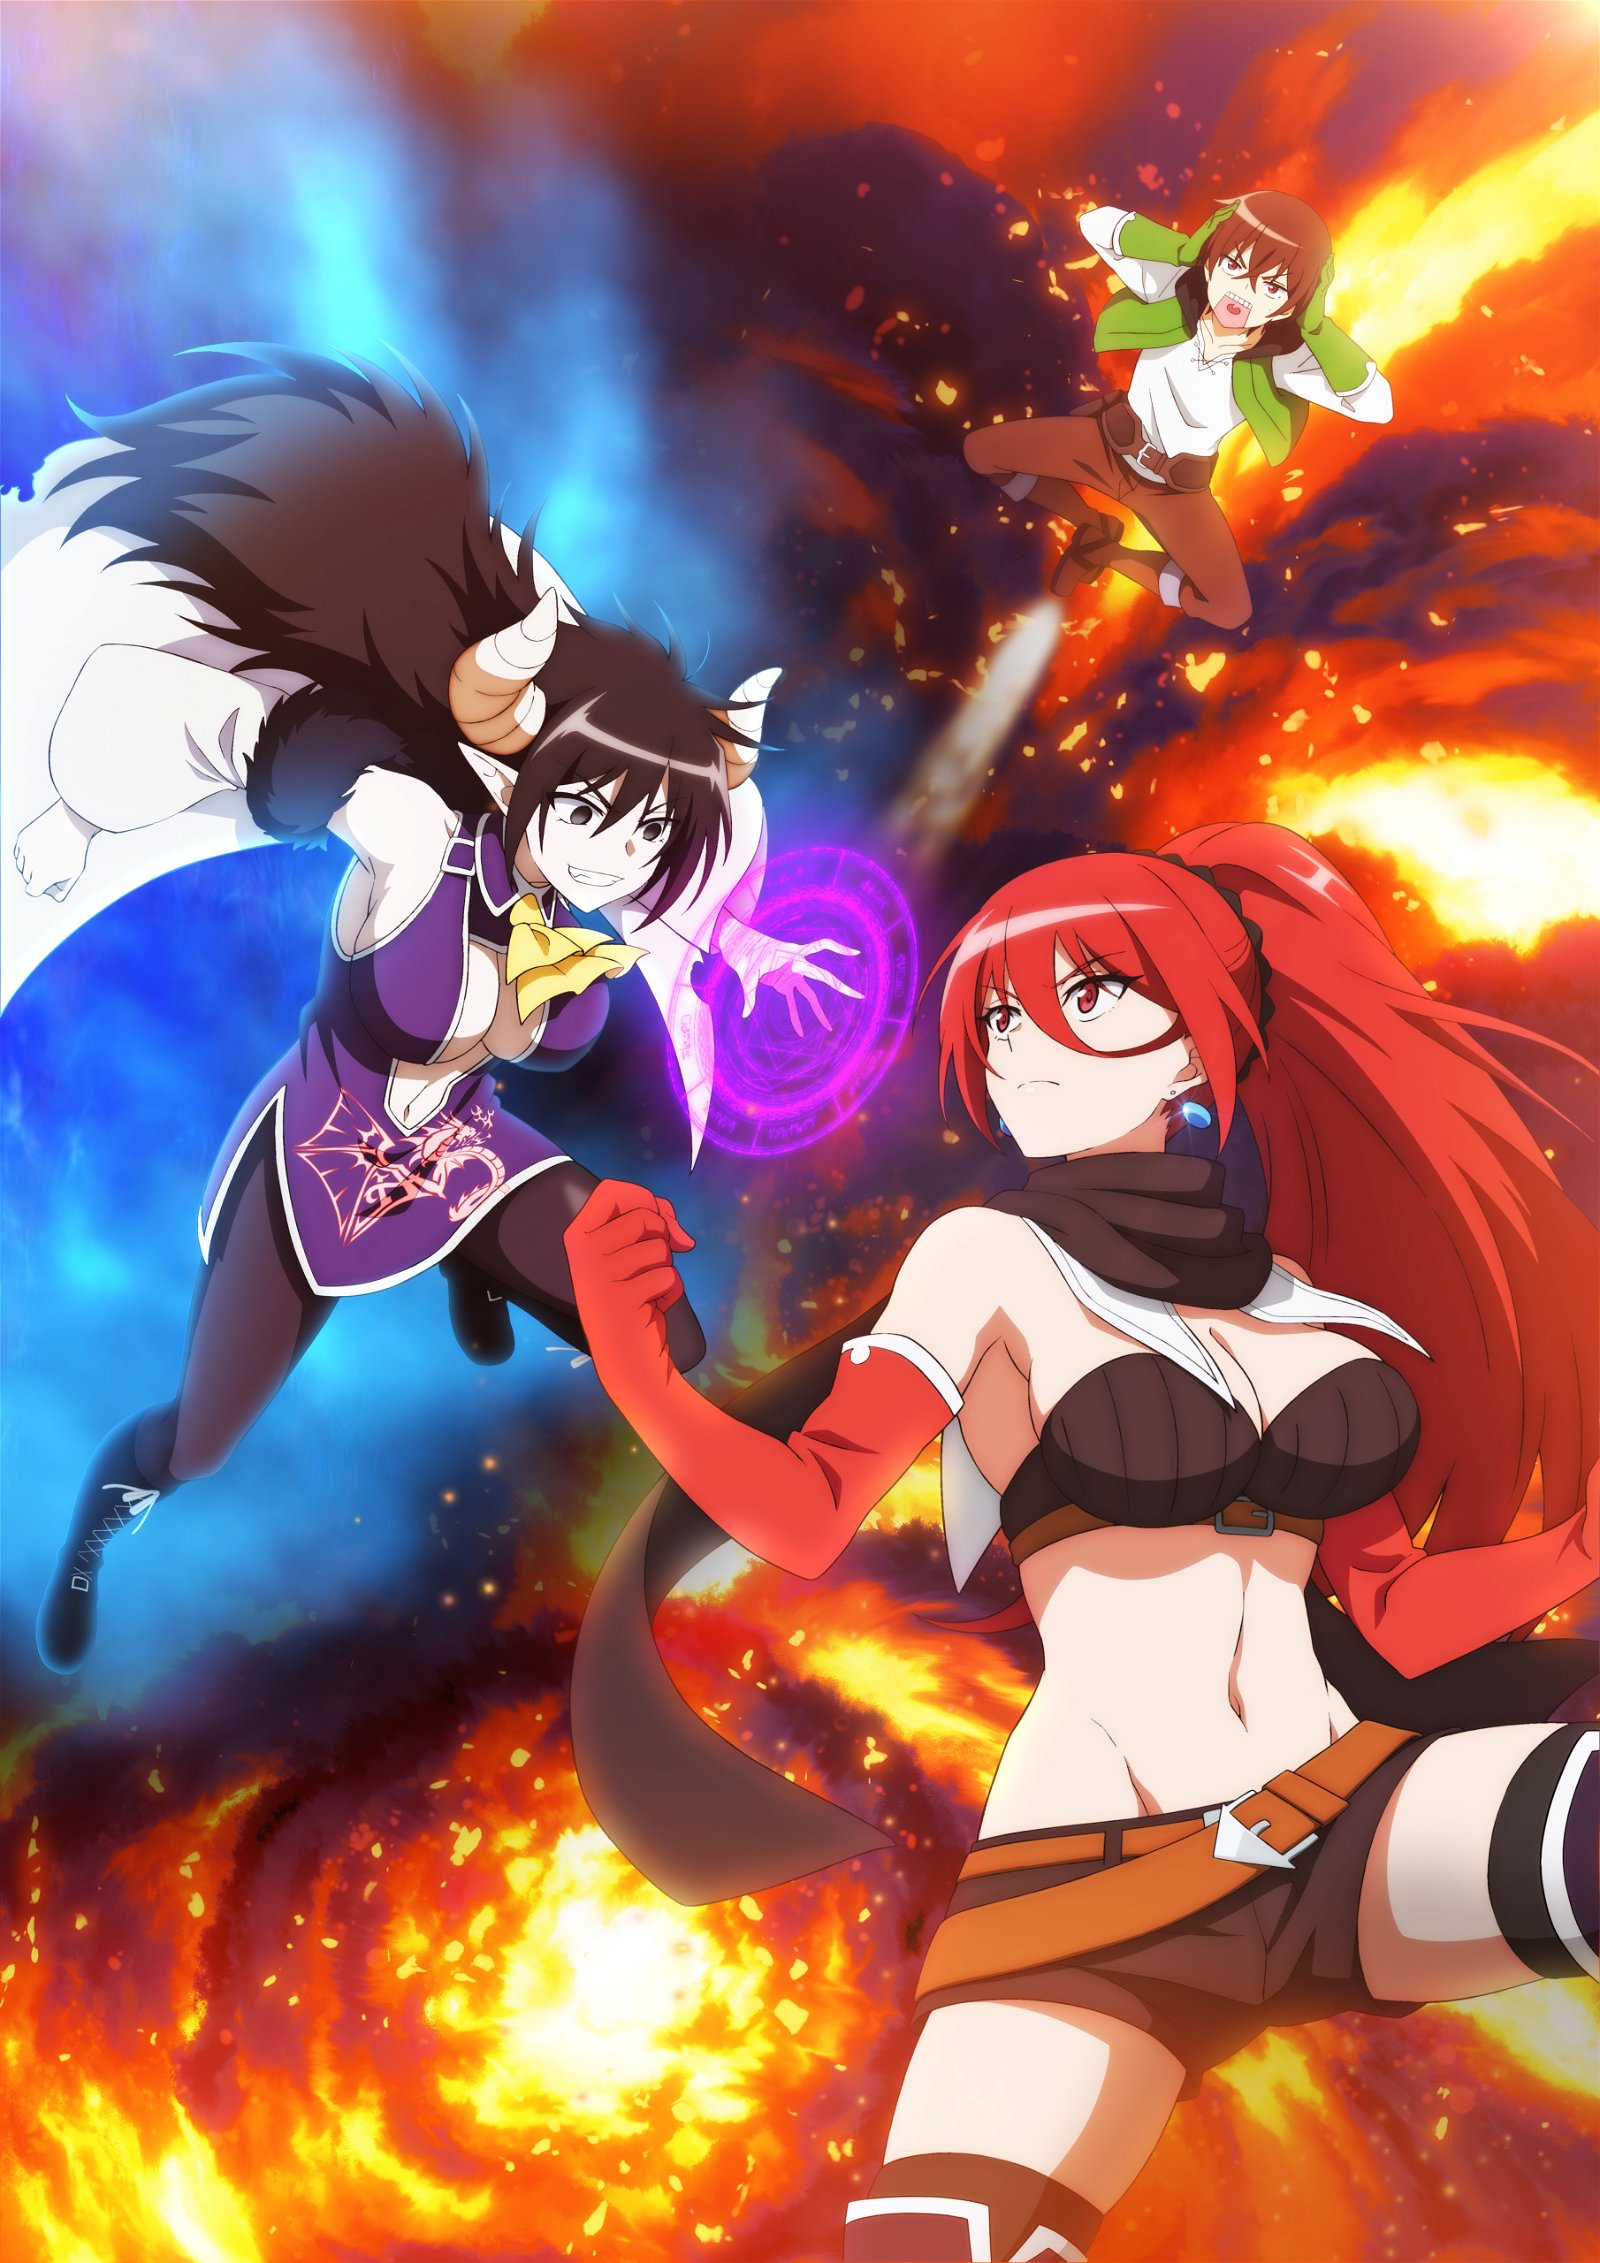 Will 'Suzume' Be on Crunchyroll? Answered